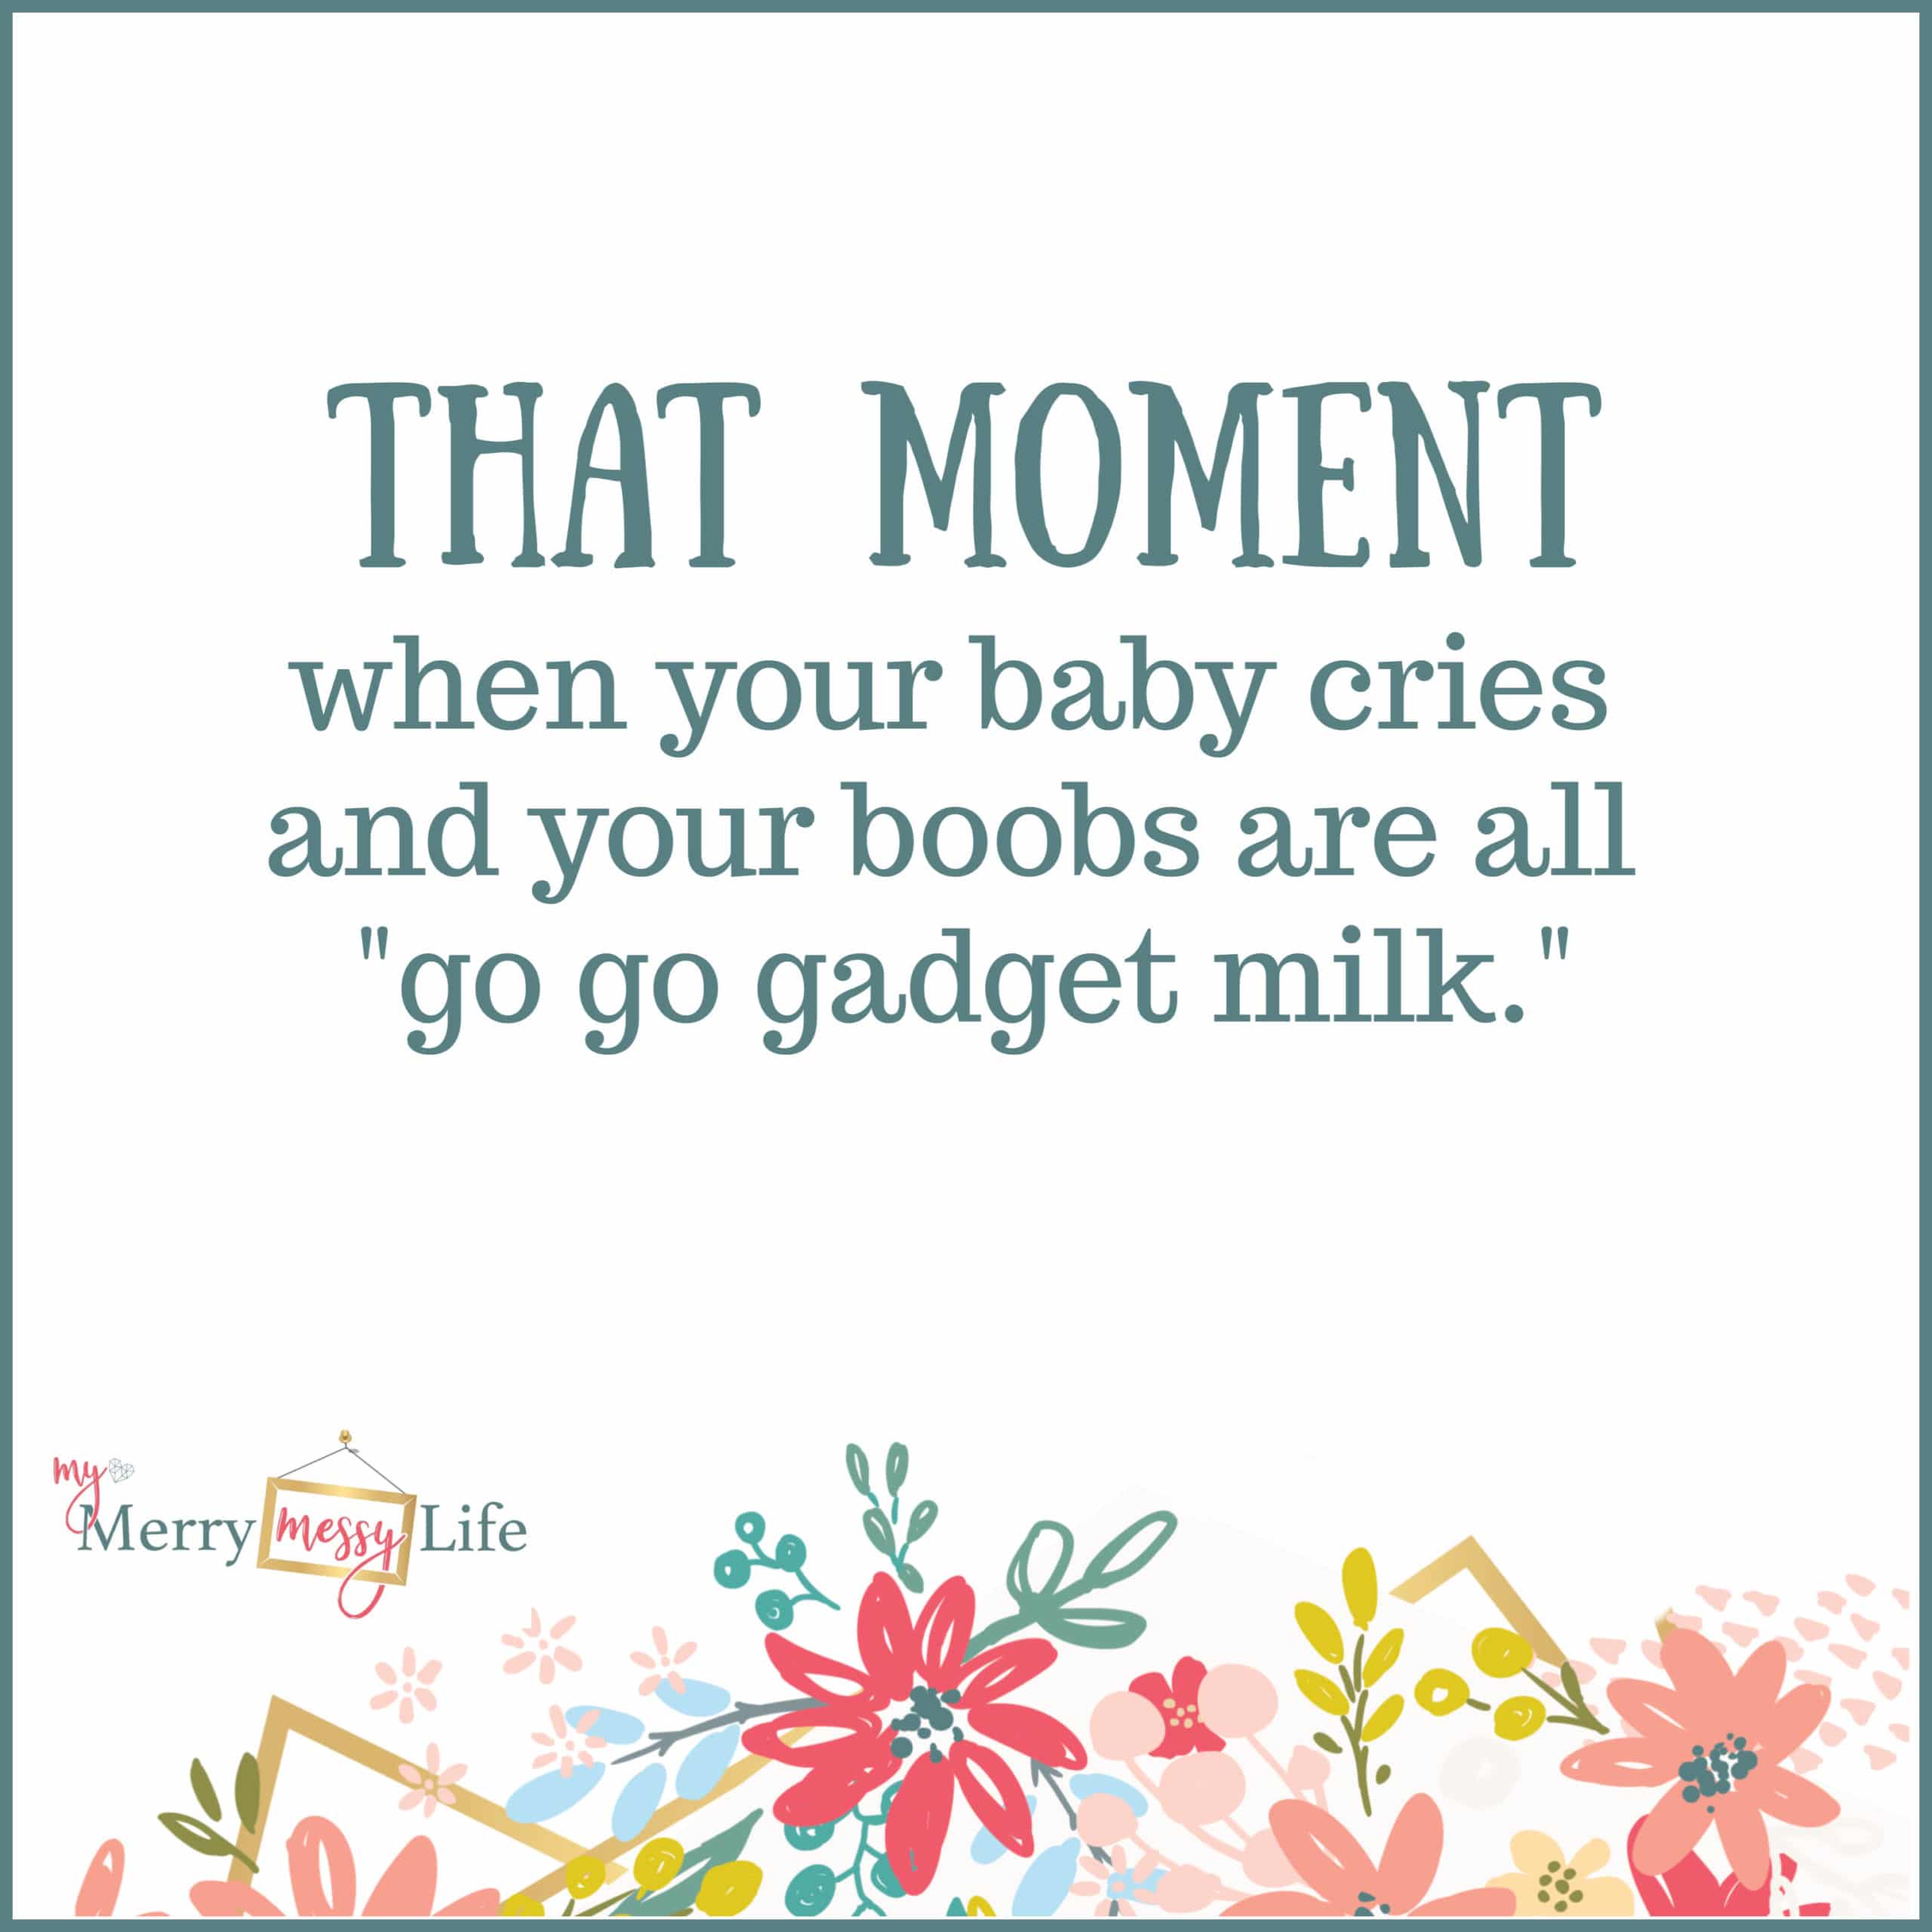 That moment when your baby cries and your boobs are all, "go go gadget milk. - Funny Mom Memes about Breastfeeding